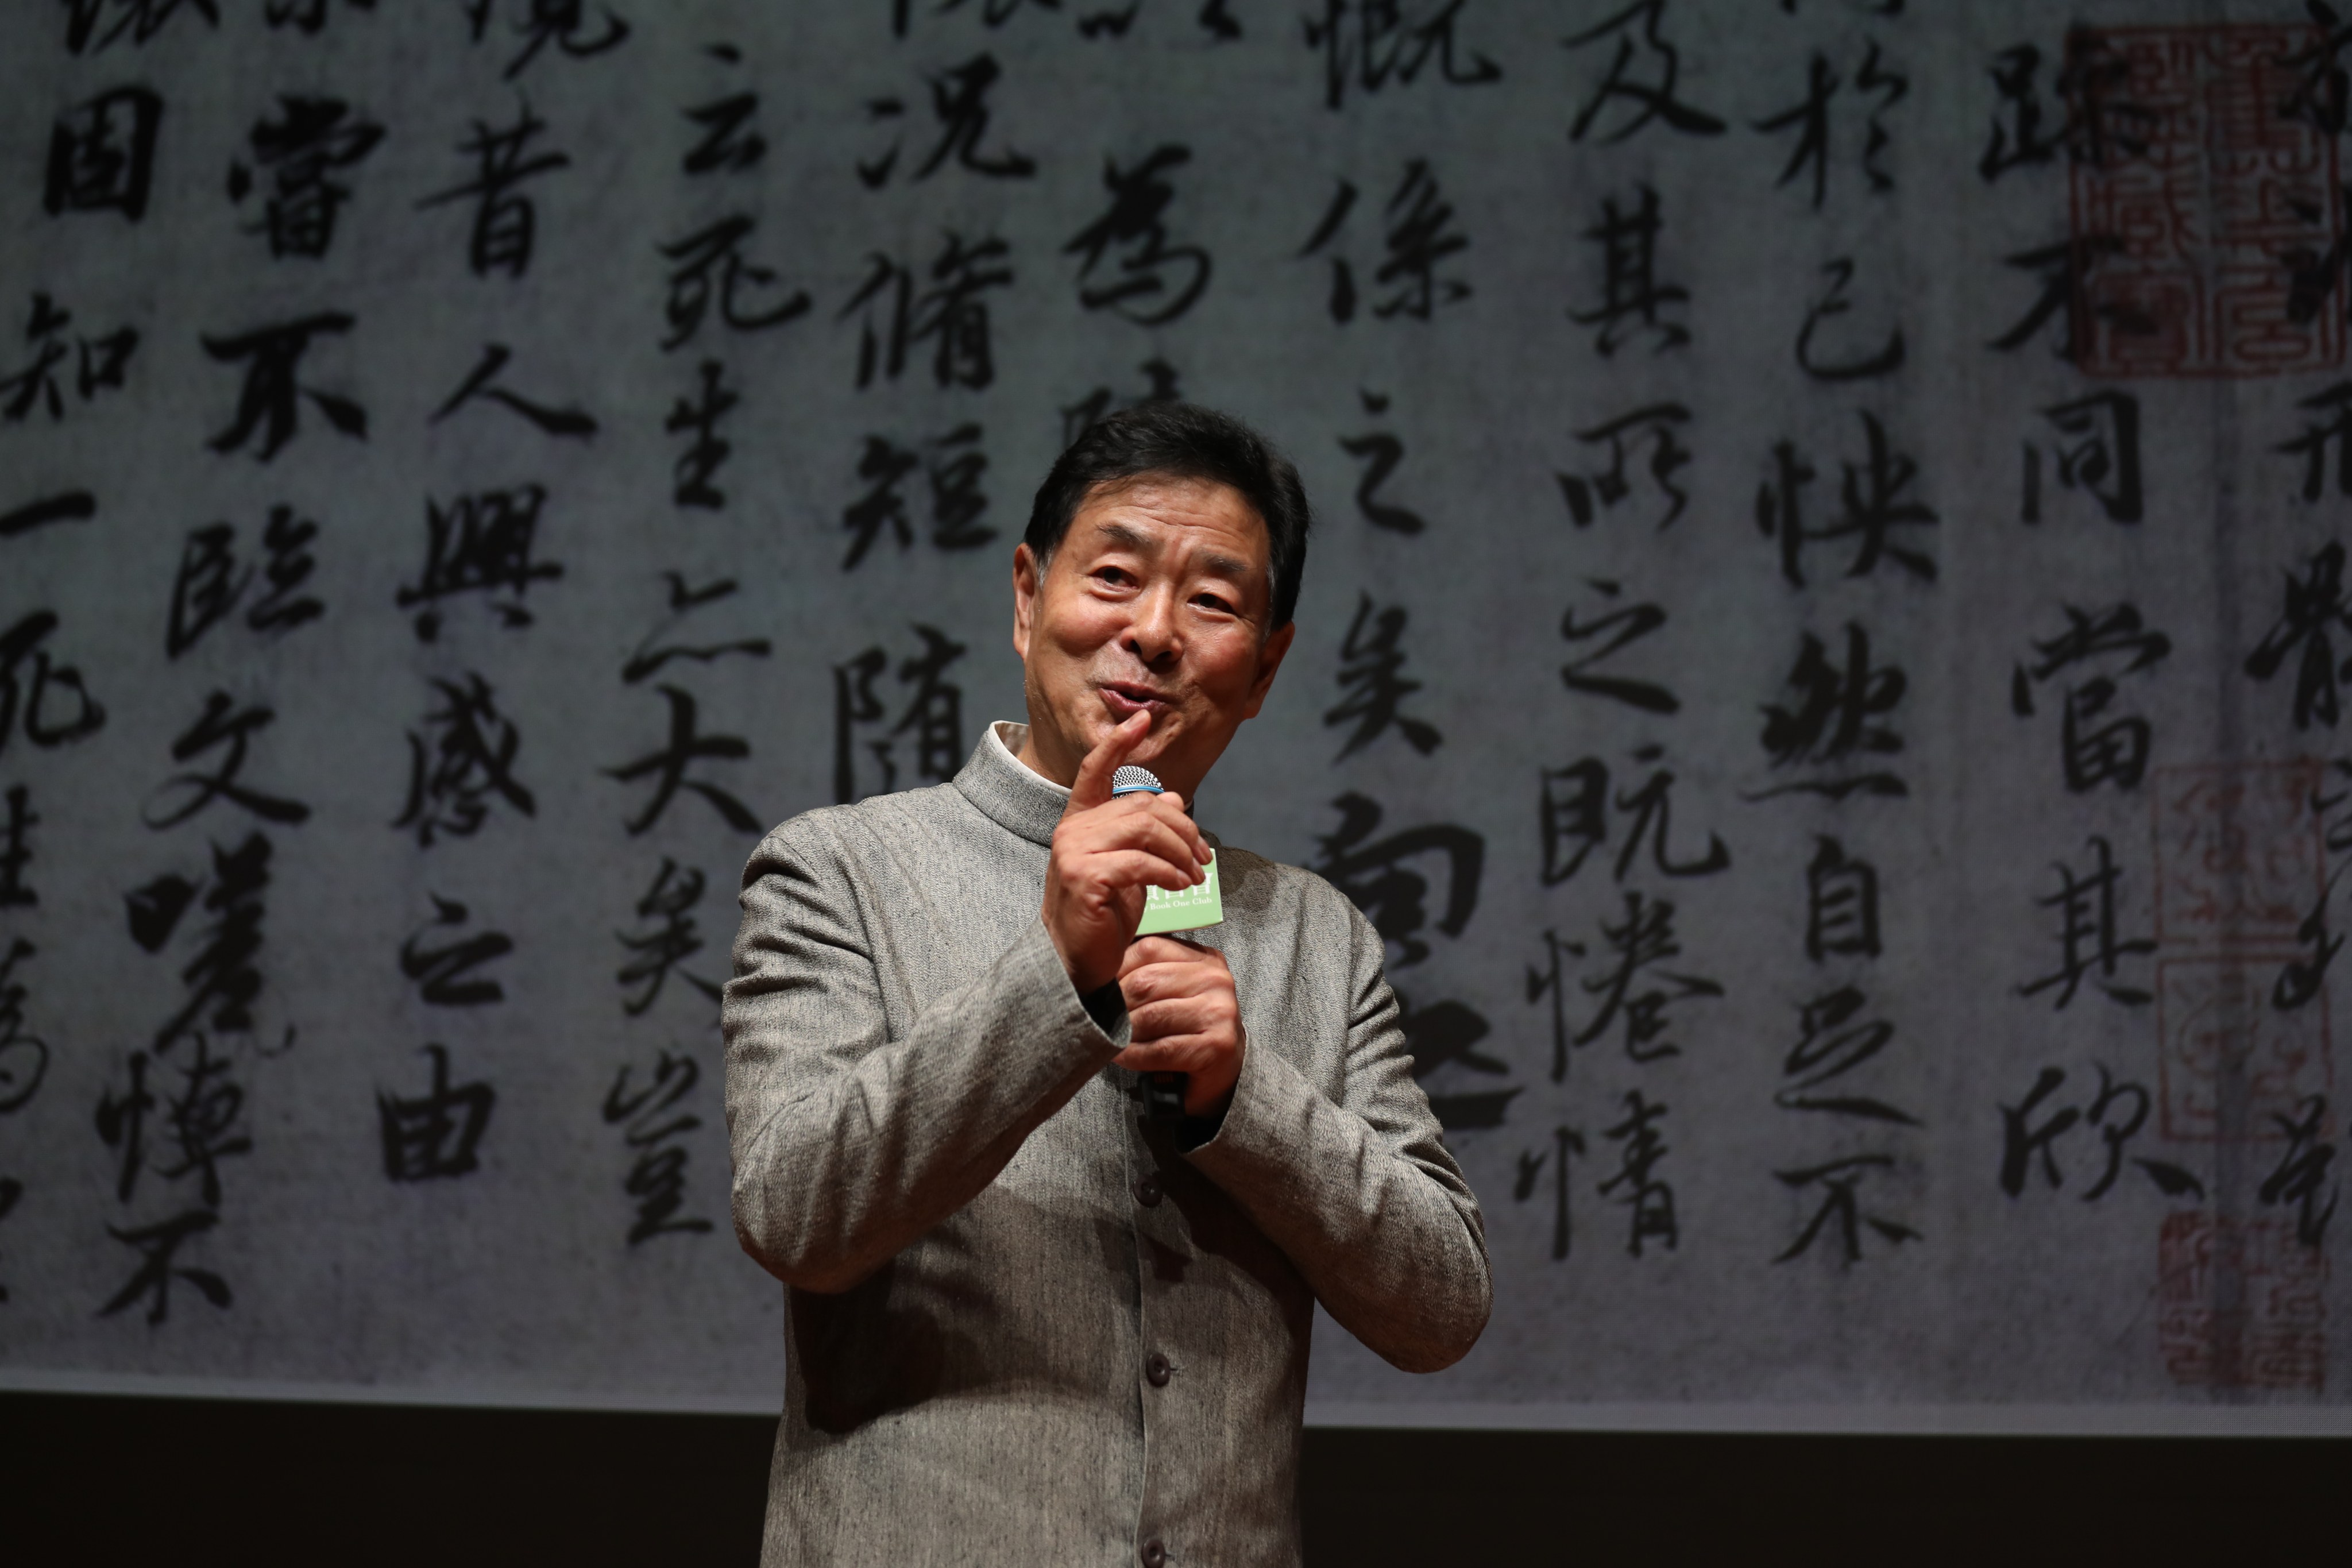 Veteran Chinse actor Pu Cunxin at a seminar and book-signing event his for his new autobiography “Me and My Roles” at the Hong Kong Palace Museum in West Kowloon on January 9, 2024. Photo: Xiaomei Chen